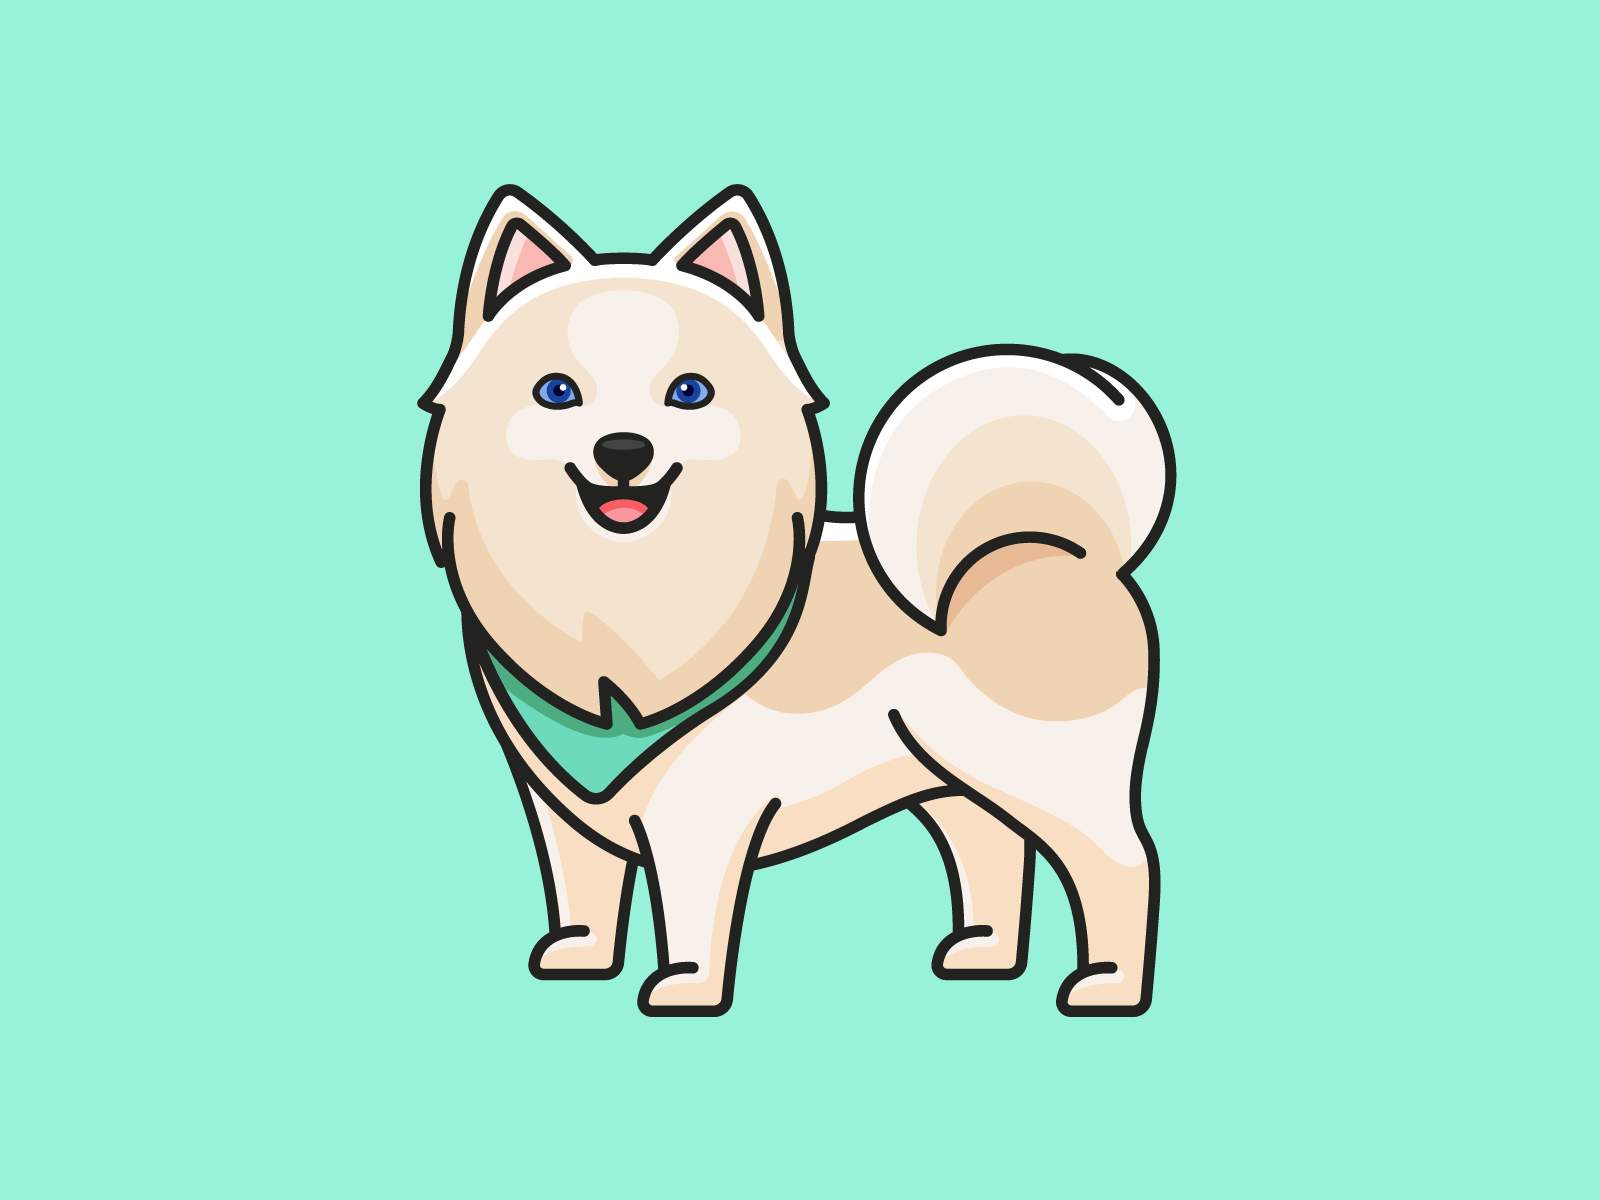 Dog Avatar designs themes templates and downloadable graphic elements on  Dribbble